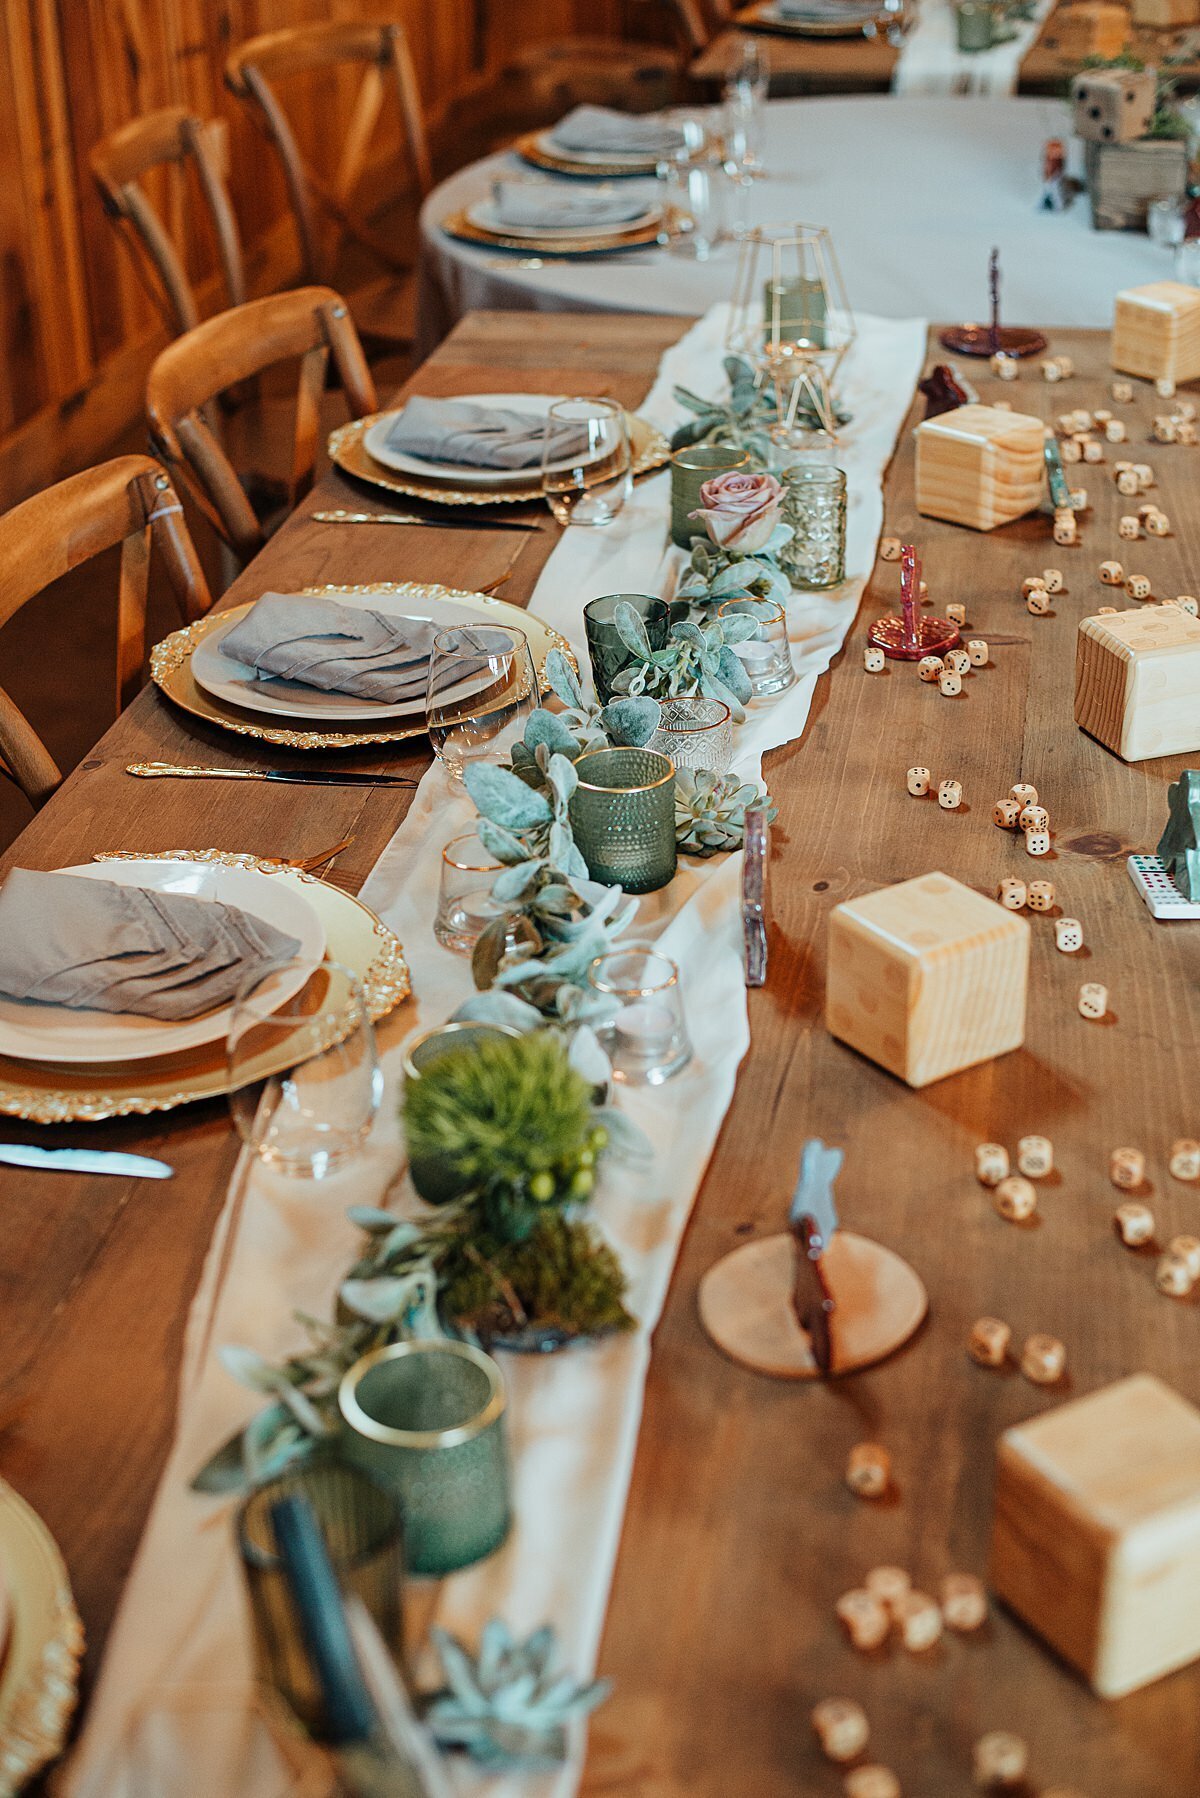 Long barn wood farm tables set for the bridal party are set with ivory chargers, white plates and gray napkins. An ivory organza table runner runs down the center of the tables. The table runner is decorated with lambs ear, green and gold votive candles and succulents. The front of the table is decorated with dice, over sized dice and meeples for a board game theme.